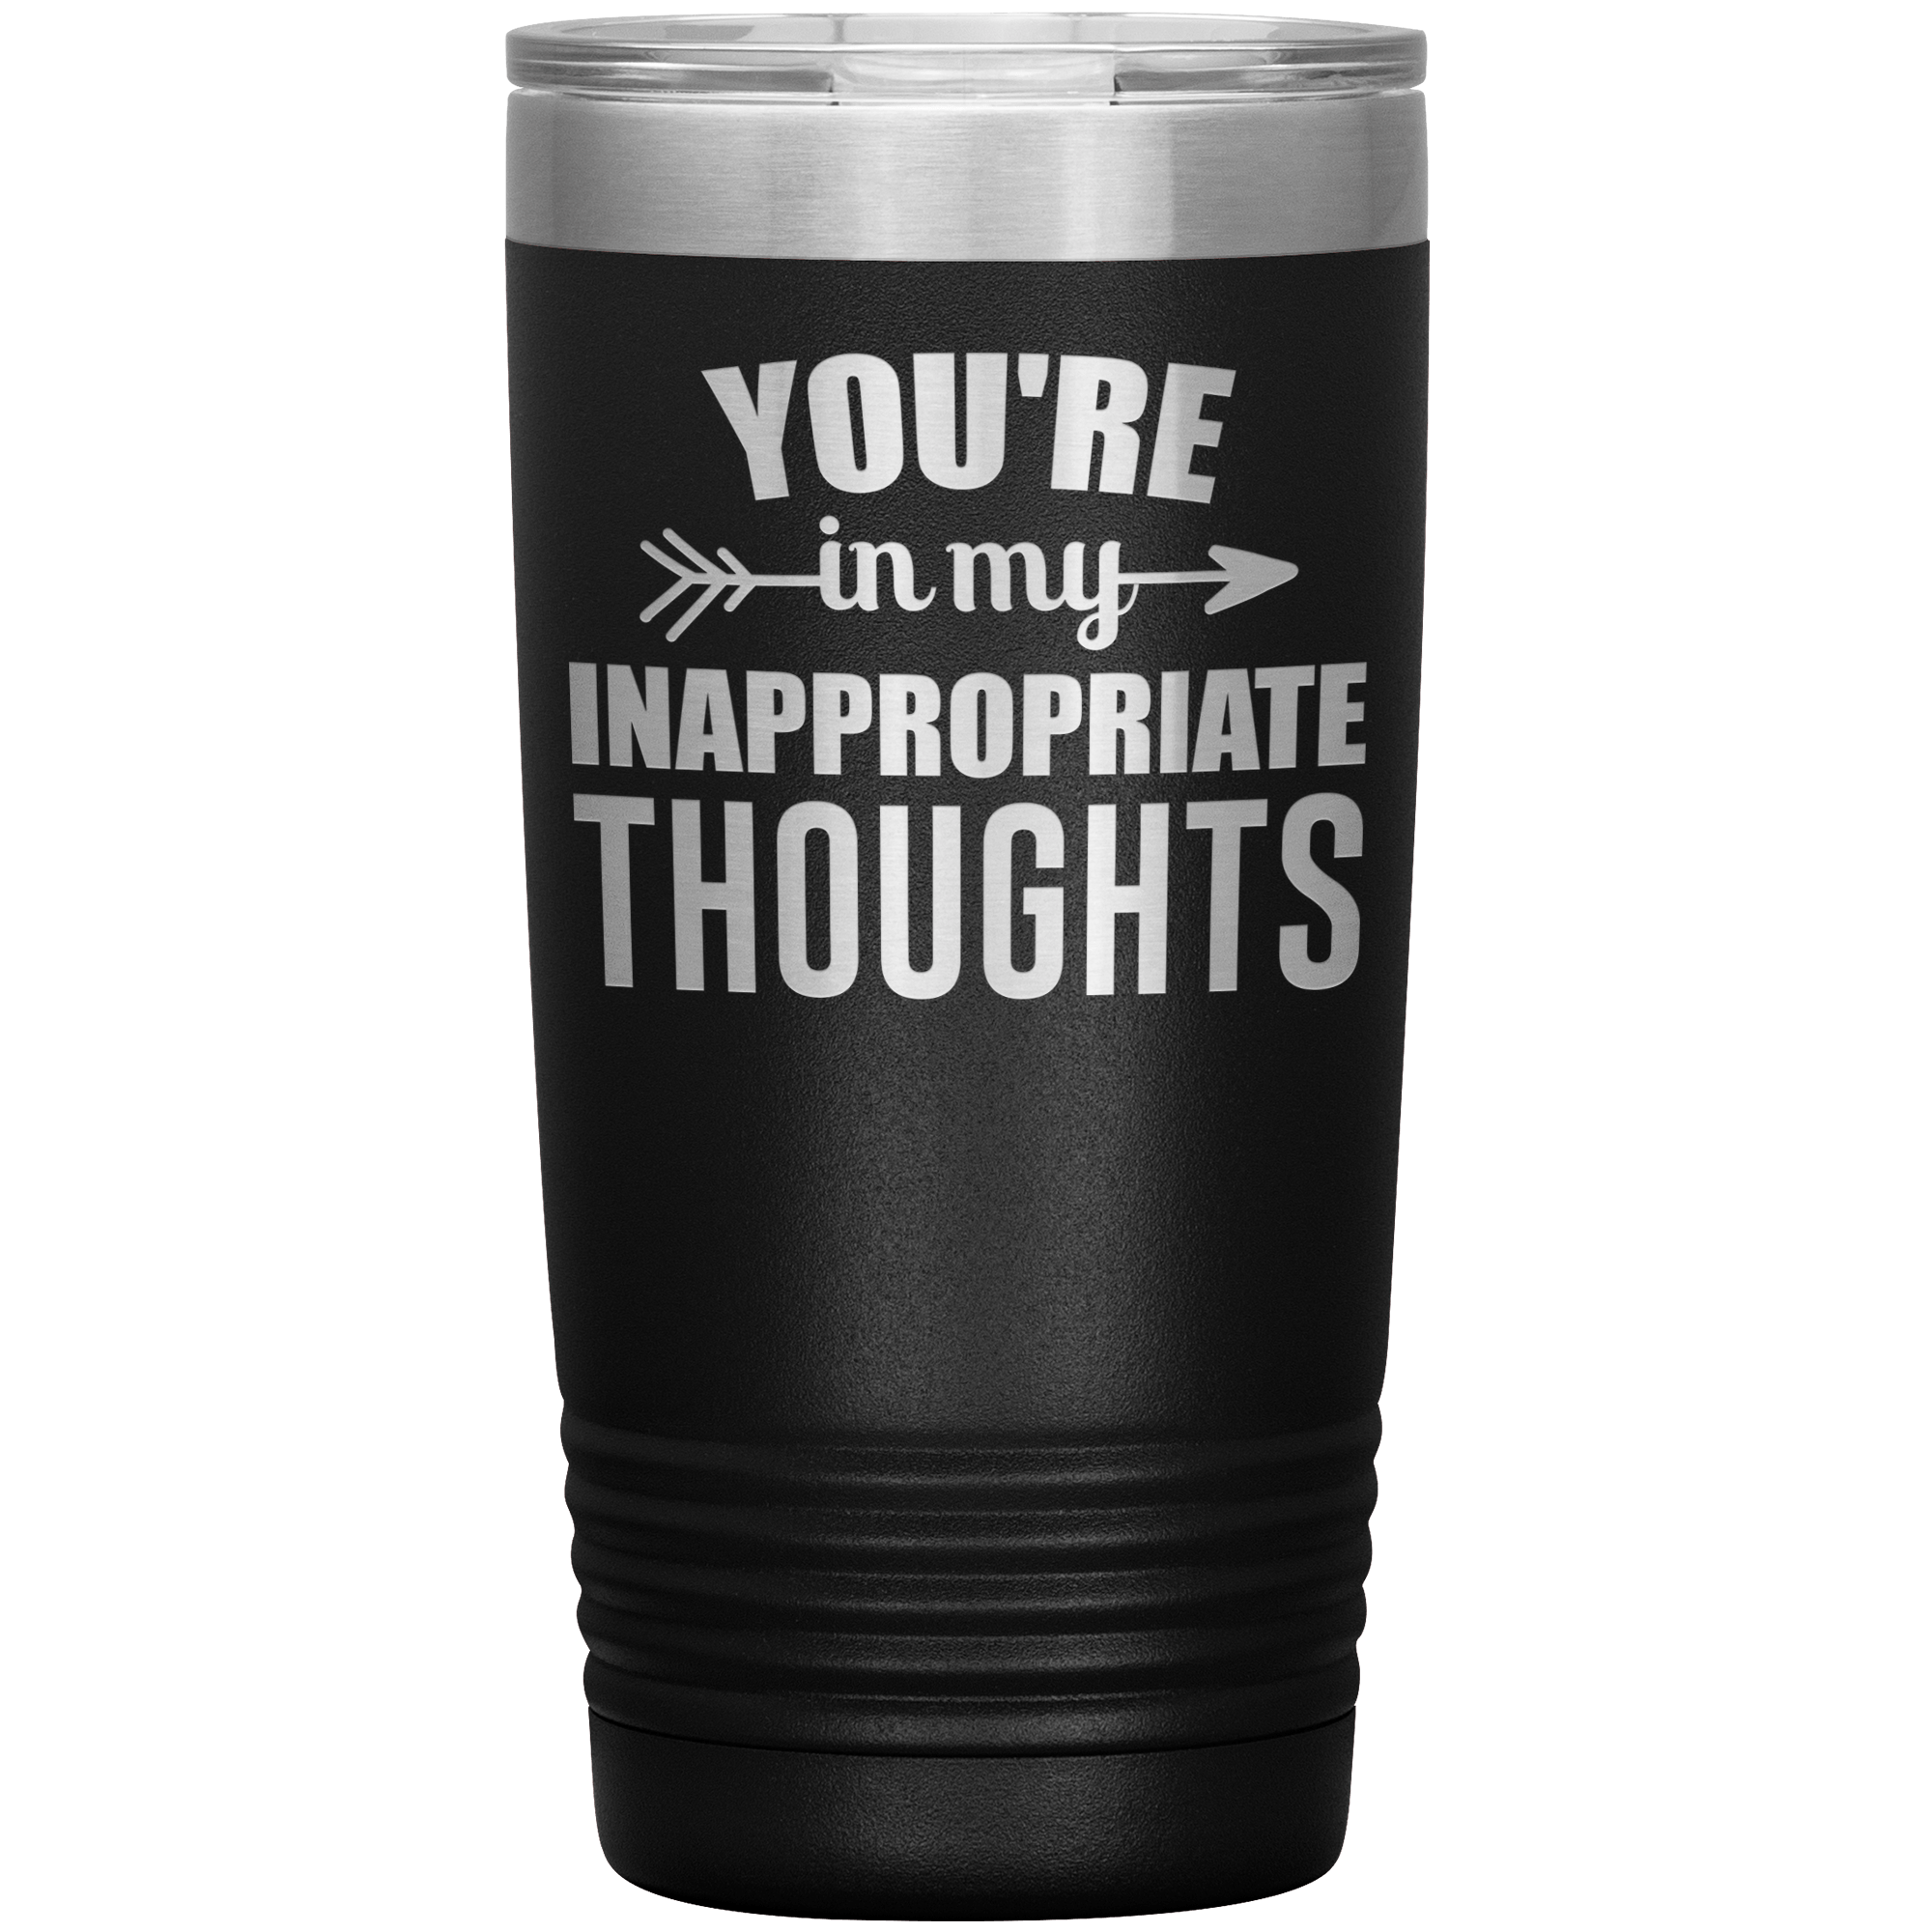 " YOU'RE IN MY INAPPROPRIATE THOUGHTS " TUMBLER